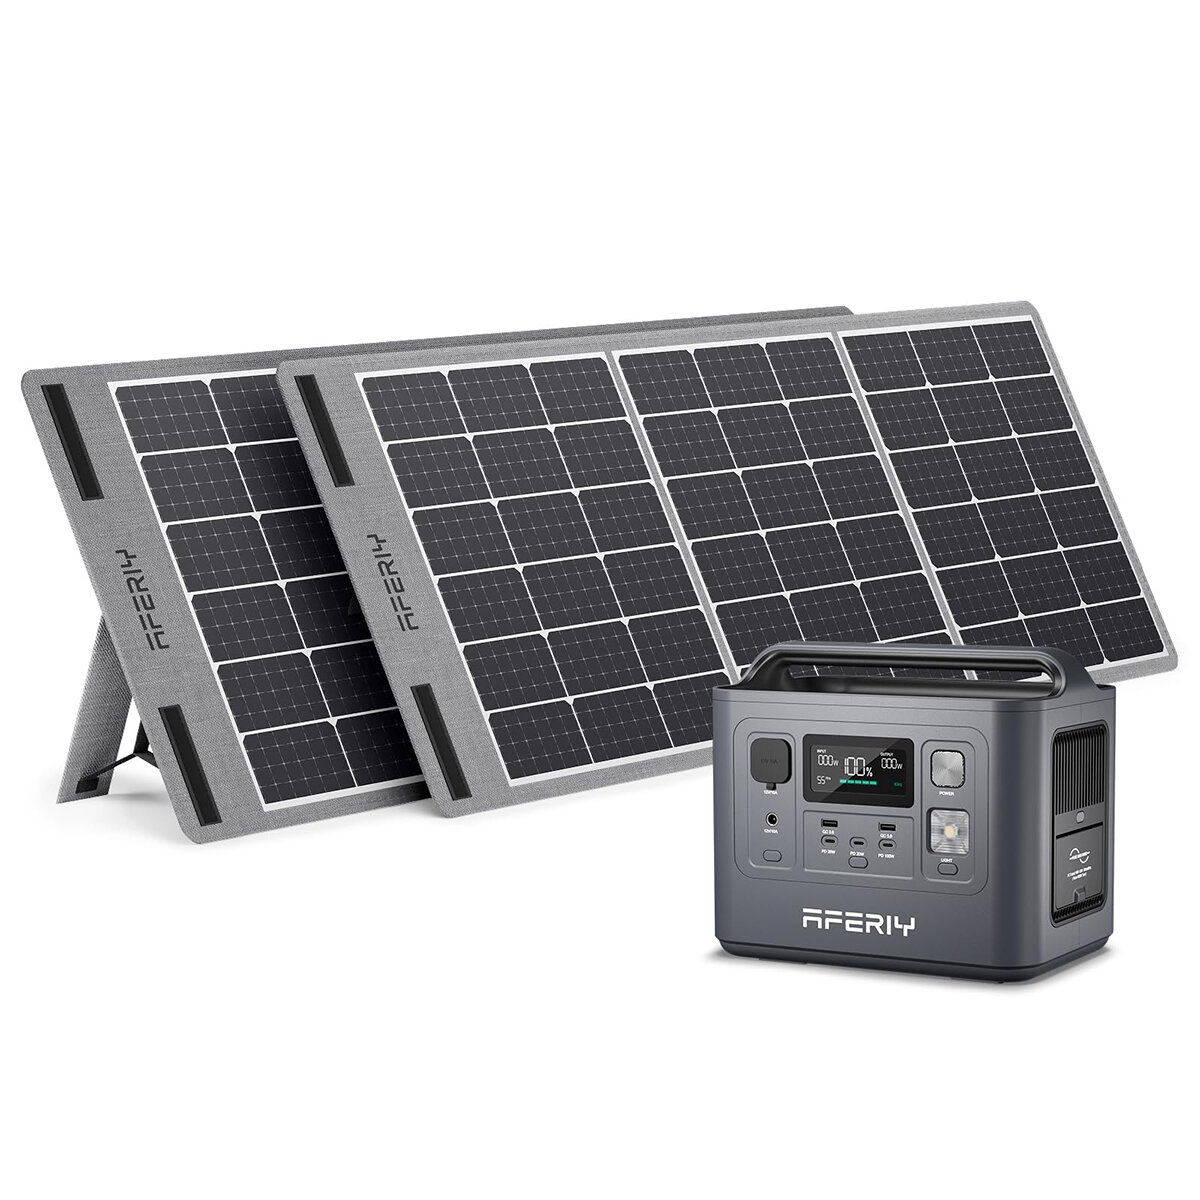 [EU Direct] Aferiy P010 800W 512Wh LiFePO4 Portable Power Station +2* S100 100W Solar Panel, UPS Pure Sine Wave Camping RV Home Emergency Portable Solar Generator